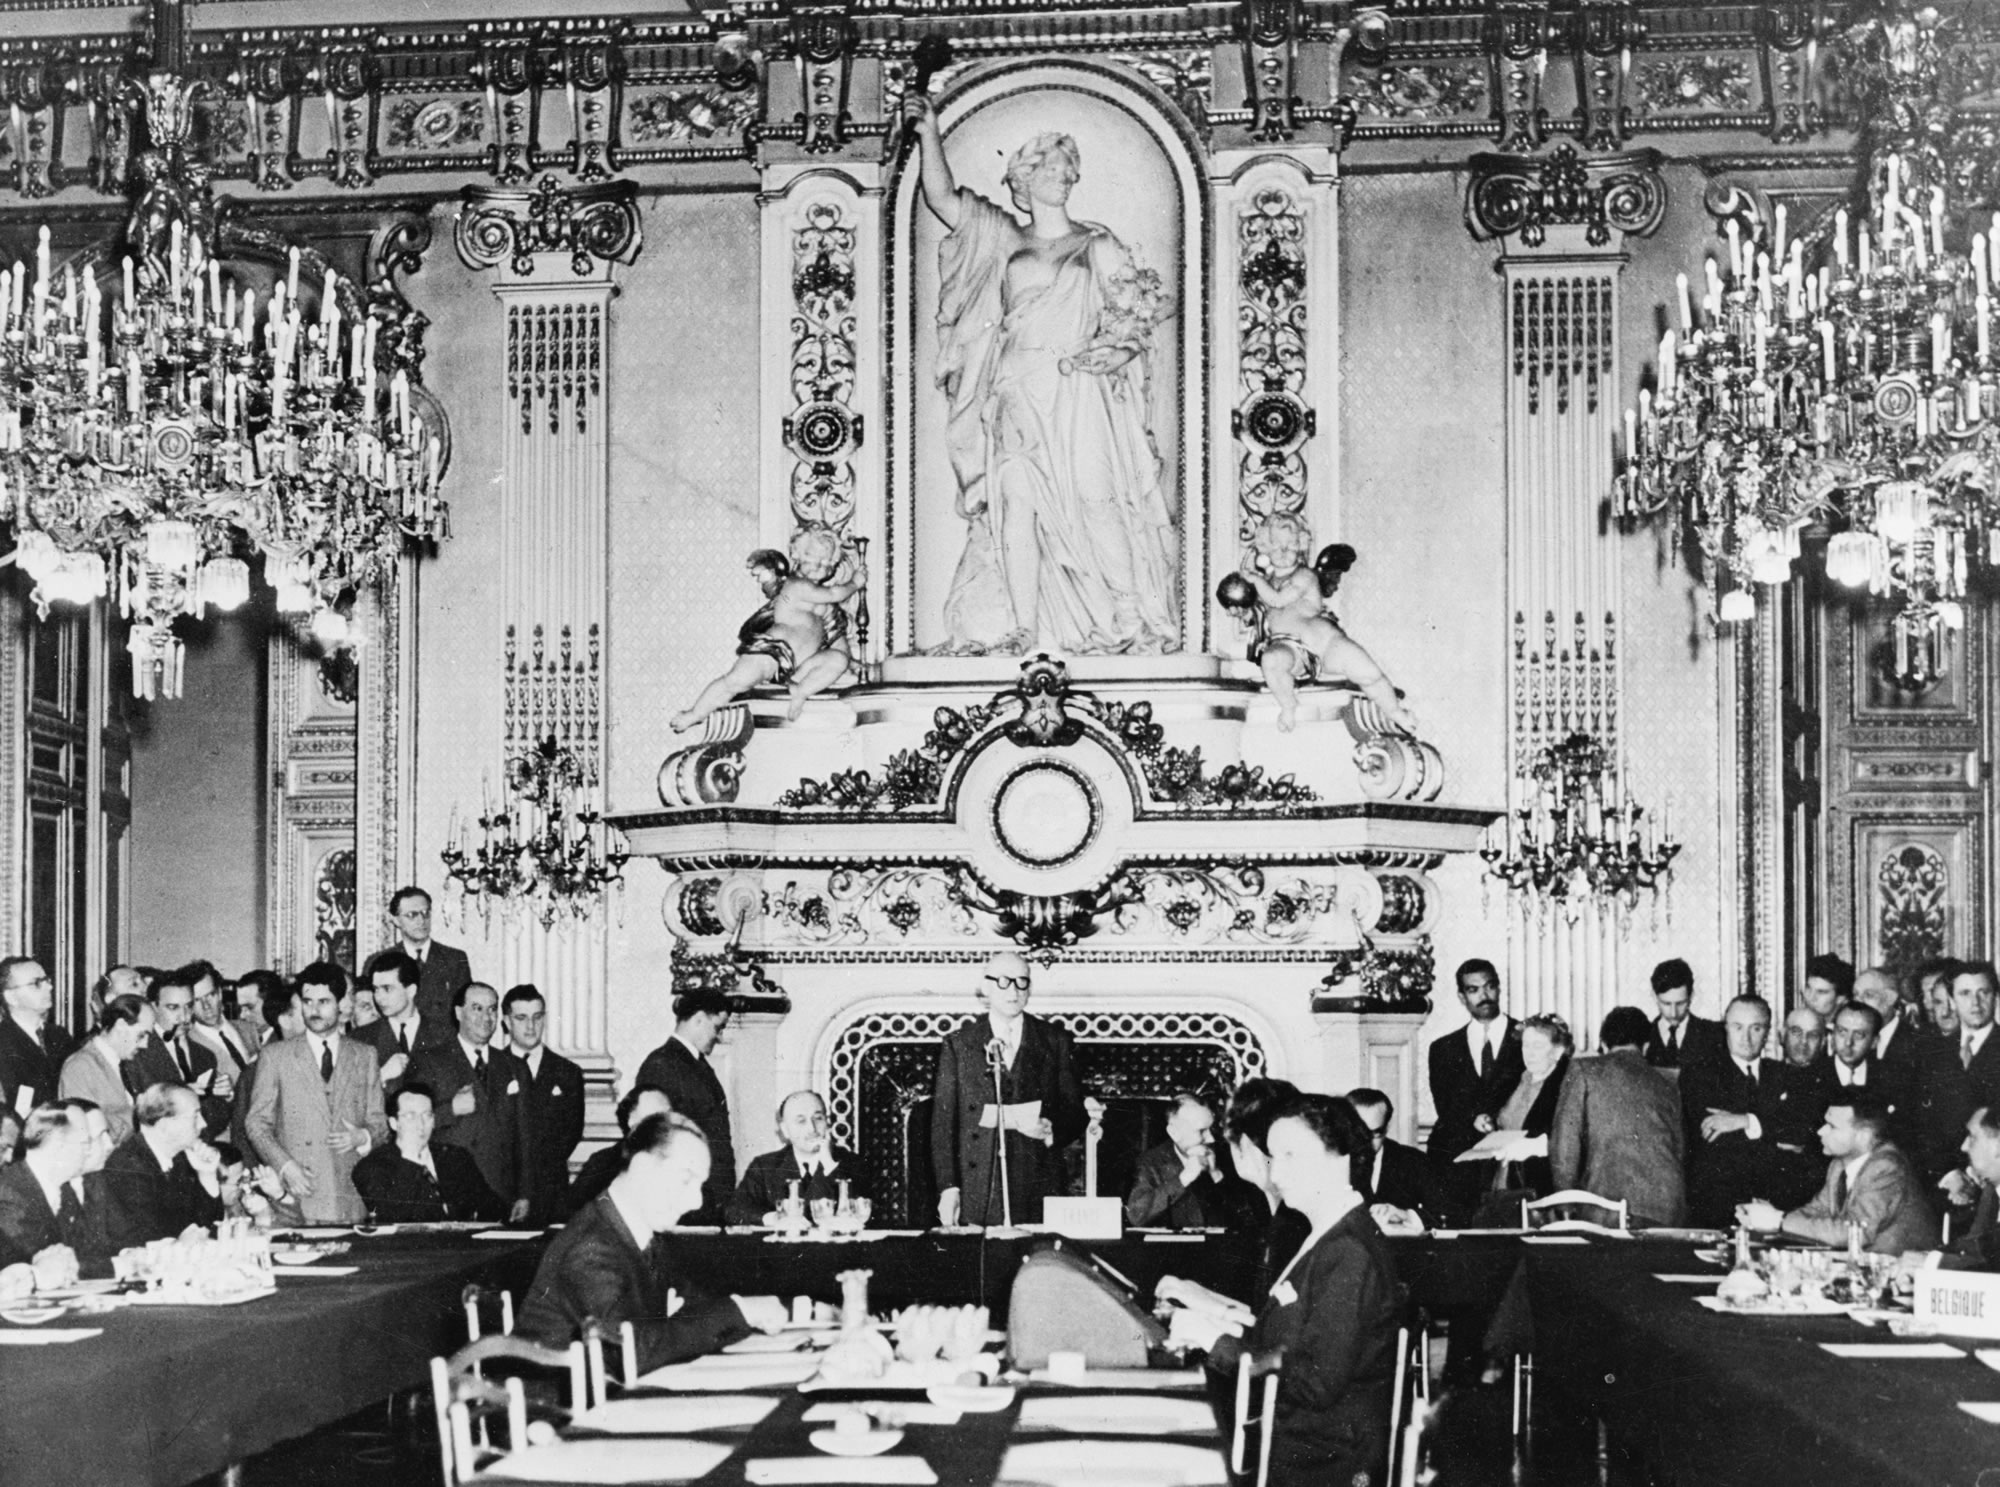 The Schuman Declaration on 9 May 1950 in the clock room of the French Foreign Ministry on the Quai d’Orsay in Paris: the French Foreign Minister Robert Schuman proposed that the European coal and steel industry be pooled to create the European Coal and Steel Community. It was thought that this would make war between the participating countries not merely unthinkable, but materially impossible.